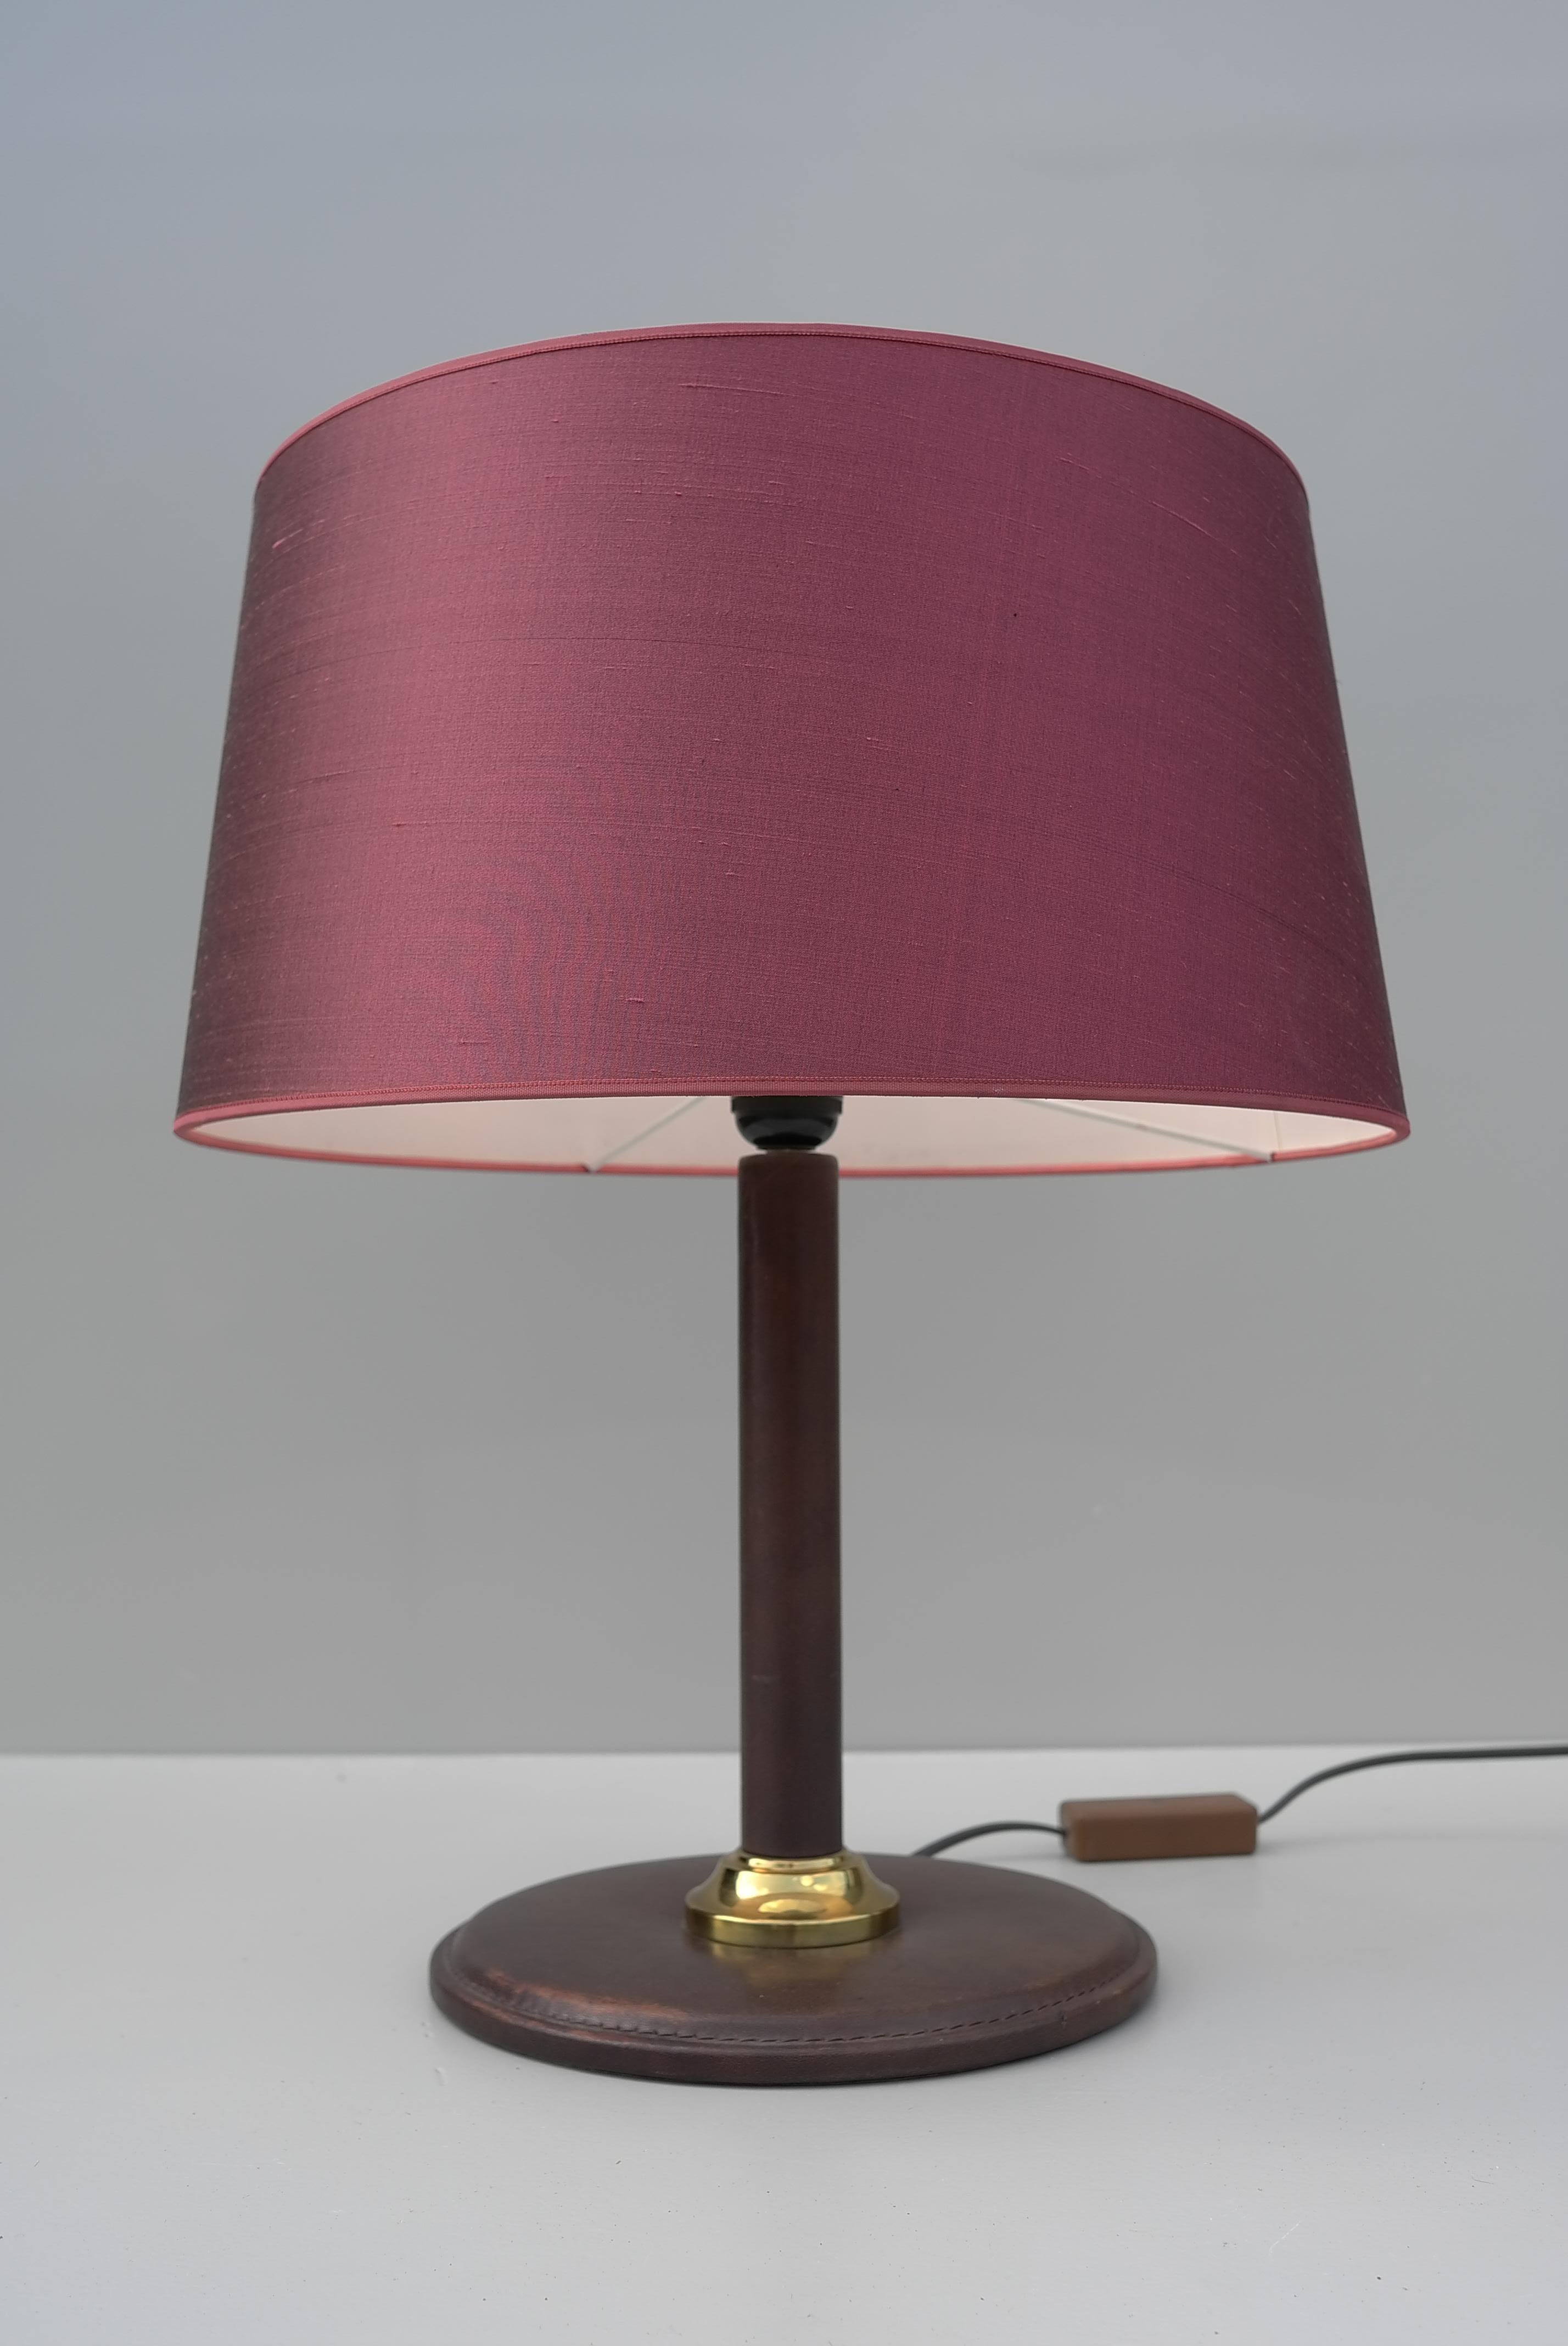 French Hand-Stitched Brown Leather Table Lamp with Silk Deep Pink Shade, France, 1960s For Sale